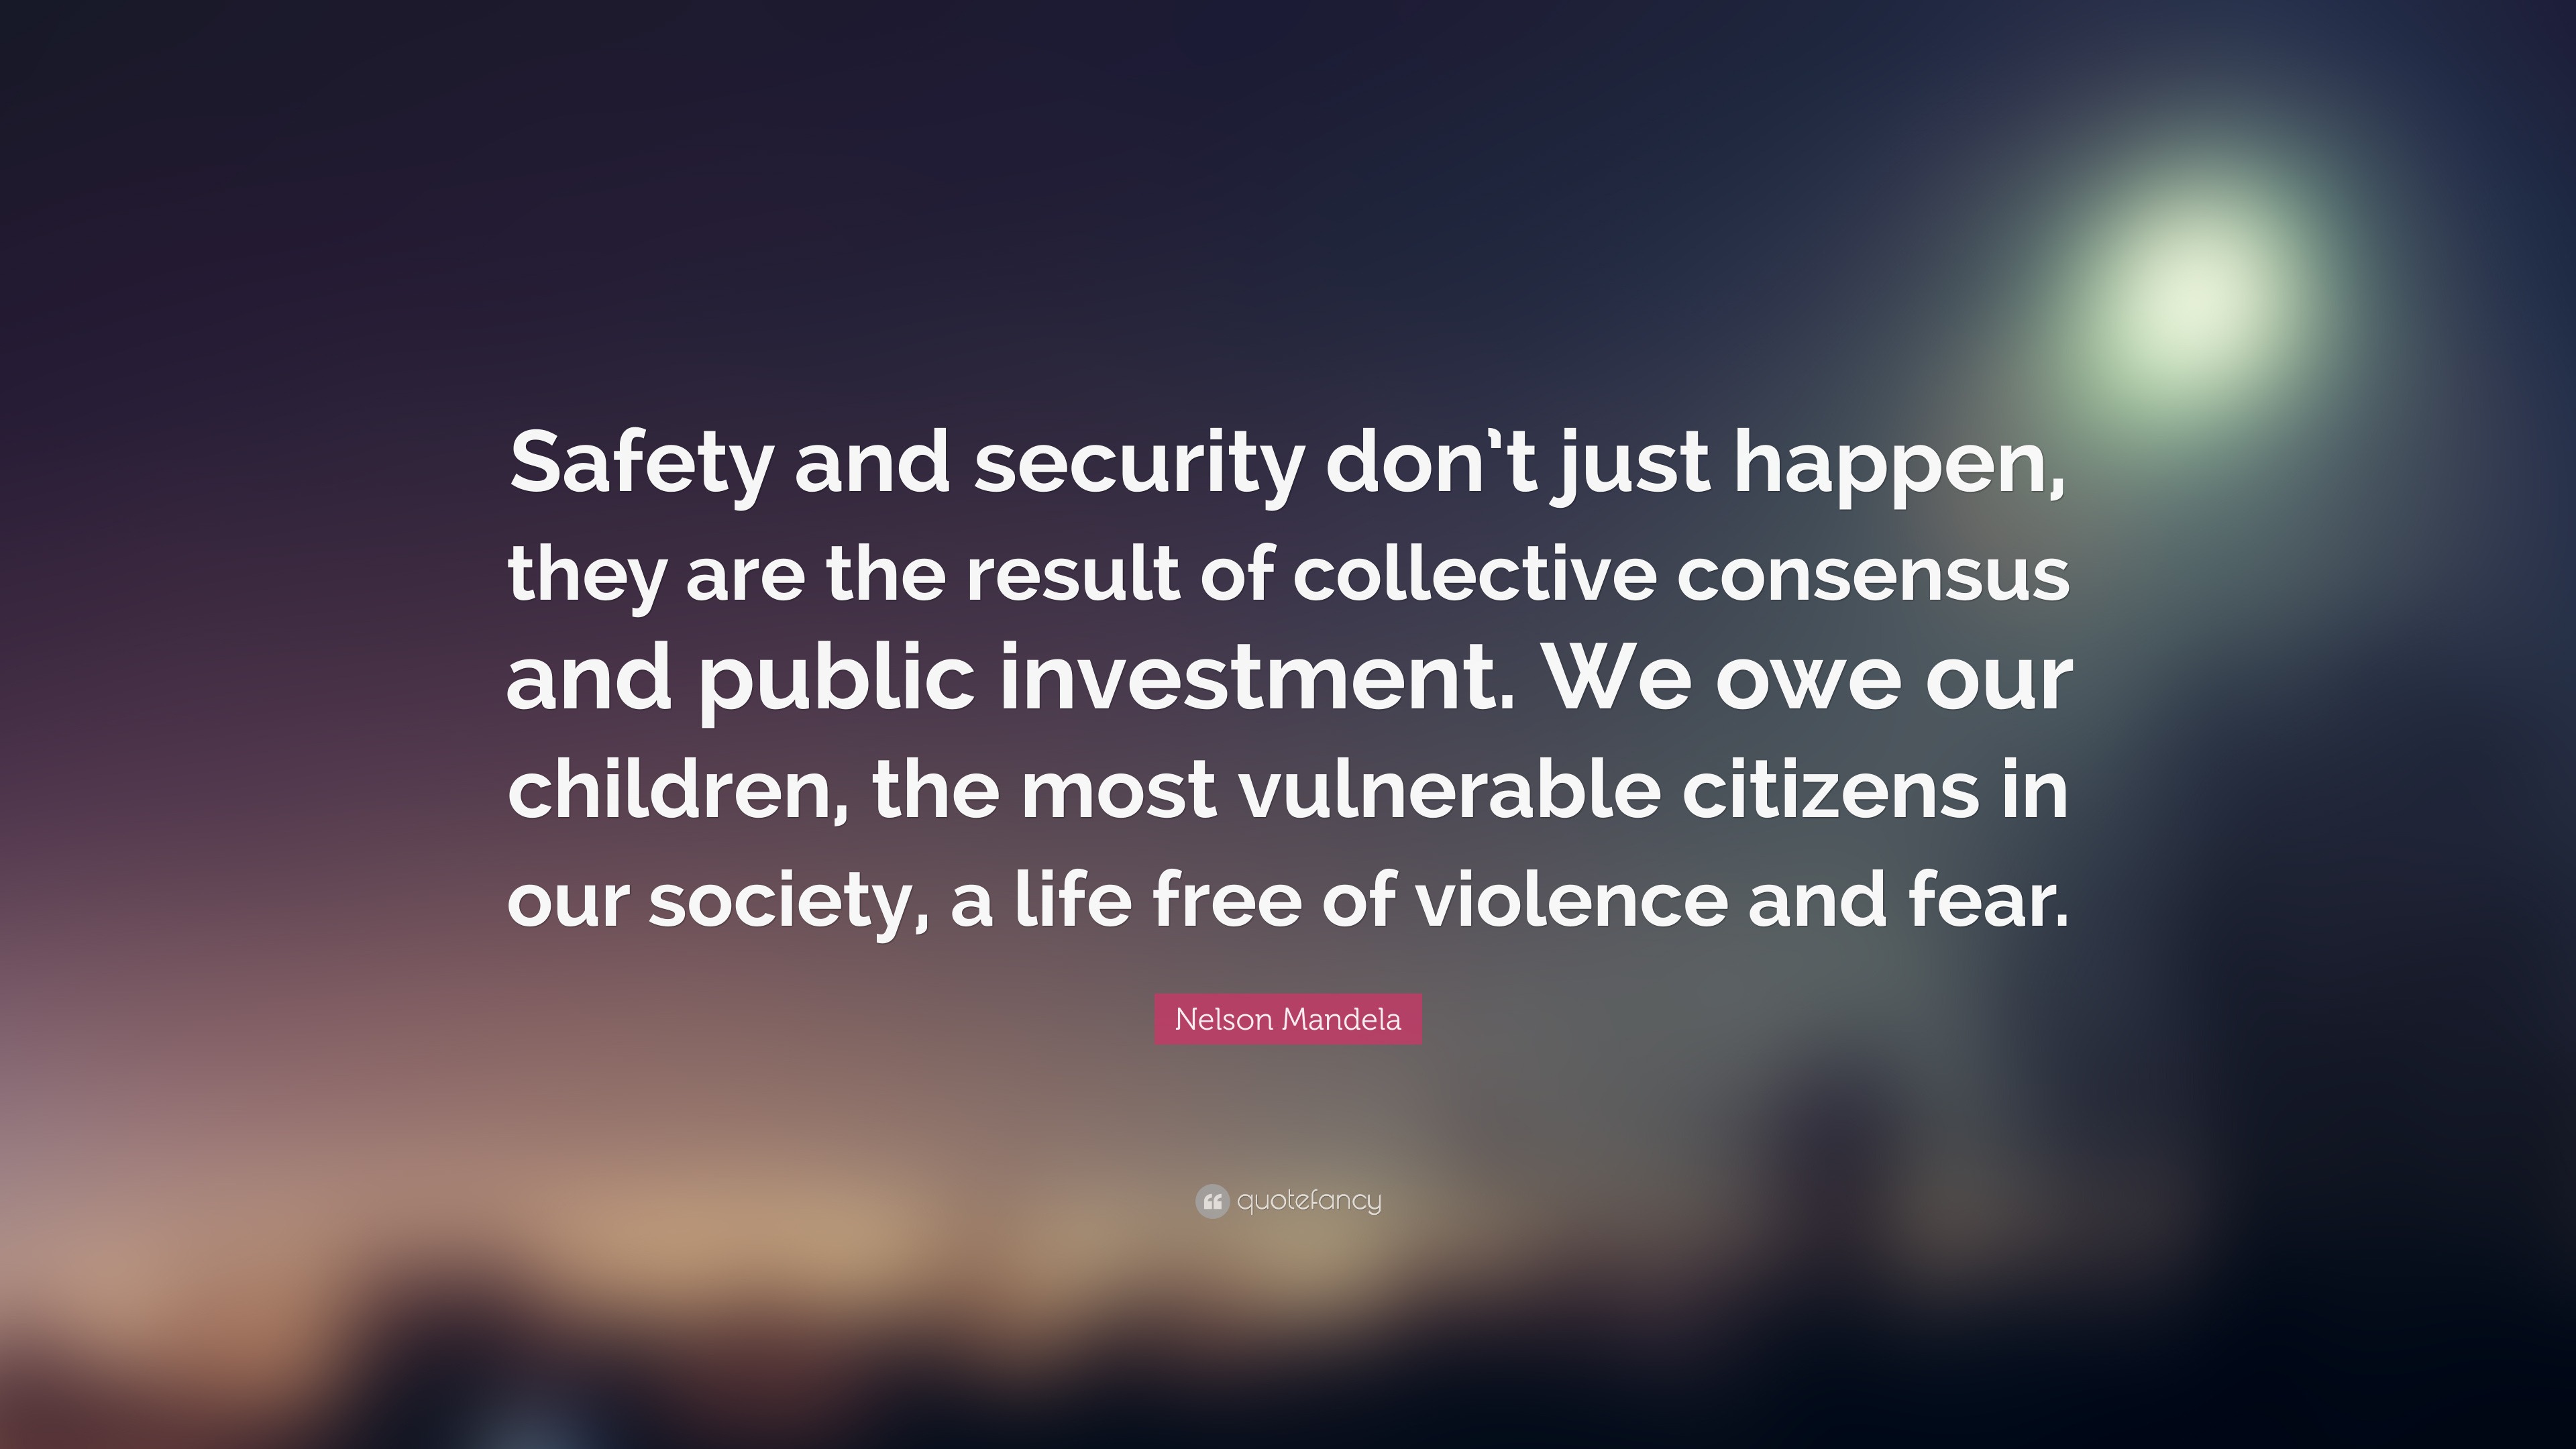 Nelson Mandela Quote: “Safety and security don’t just happen, they are